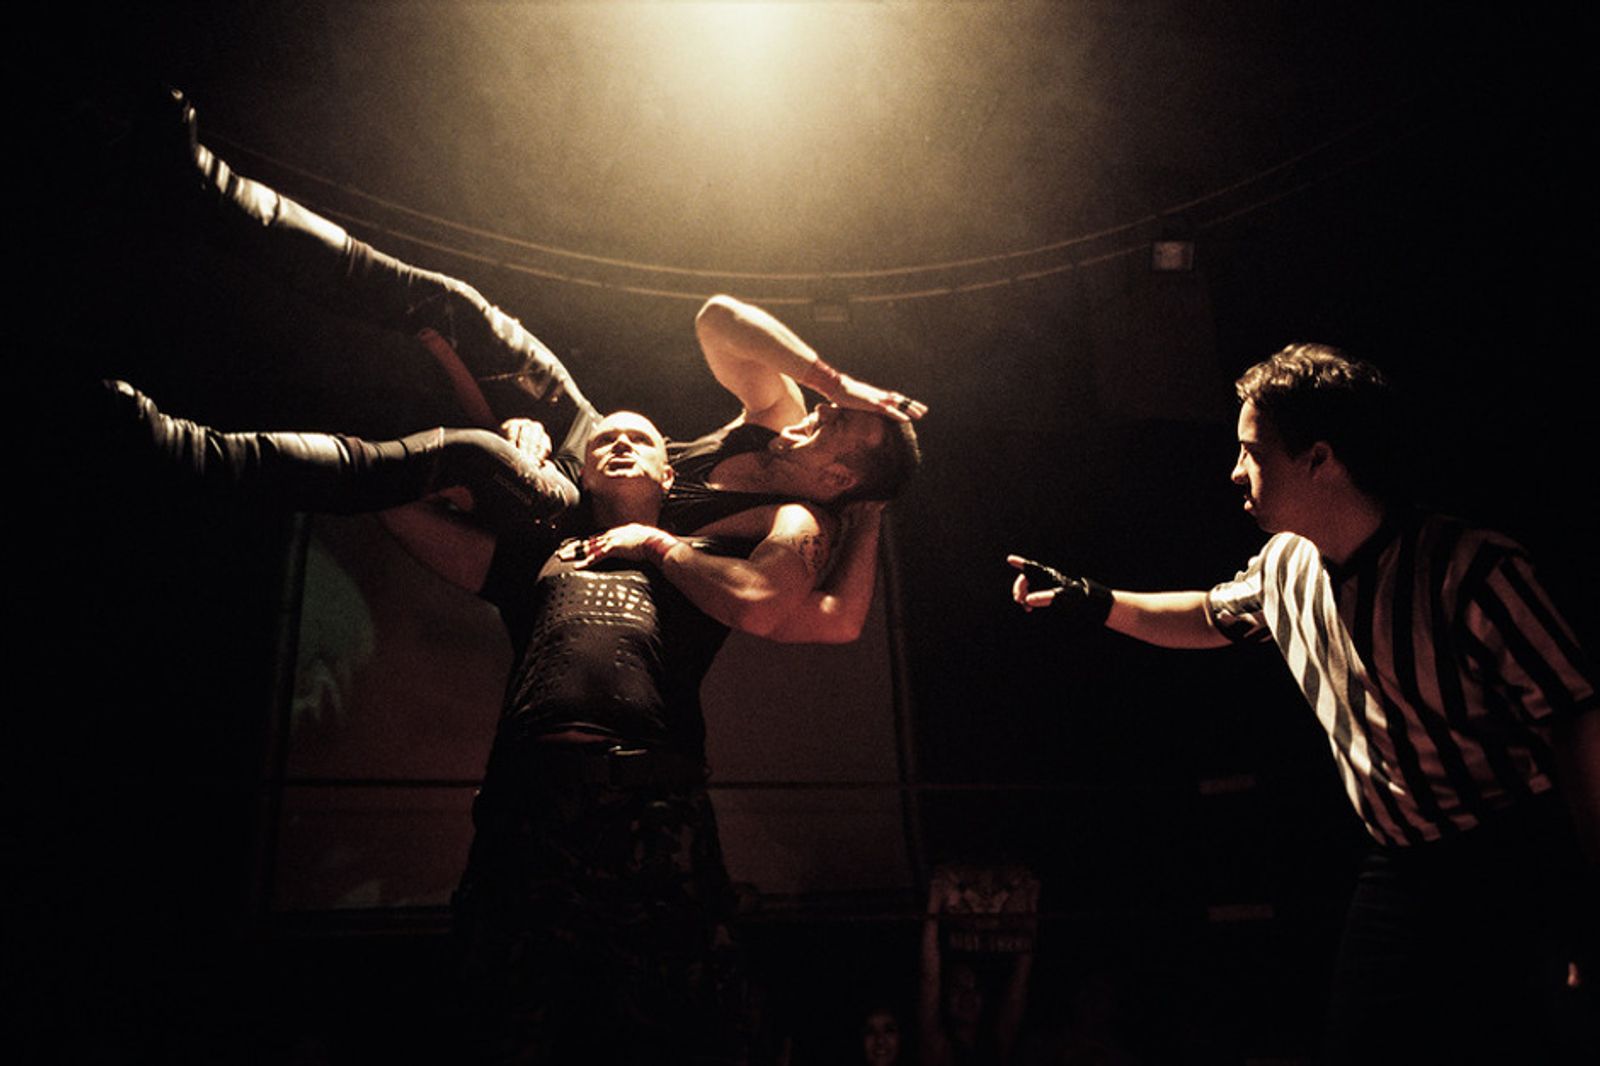 © Dmitry Lookianov - Image from the Wrestling in Moscow photography project